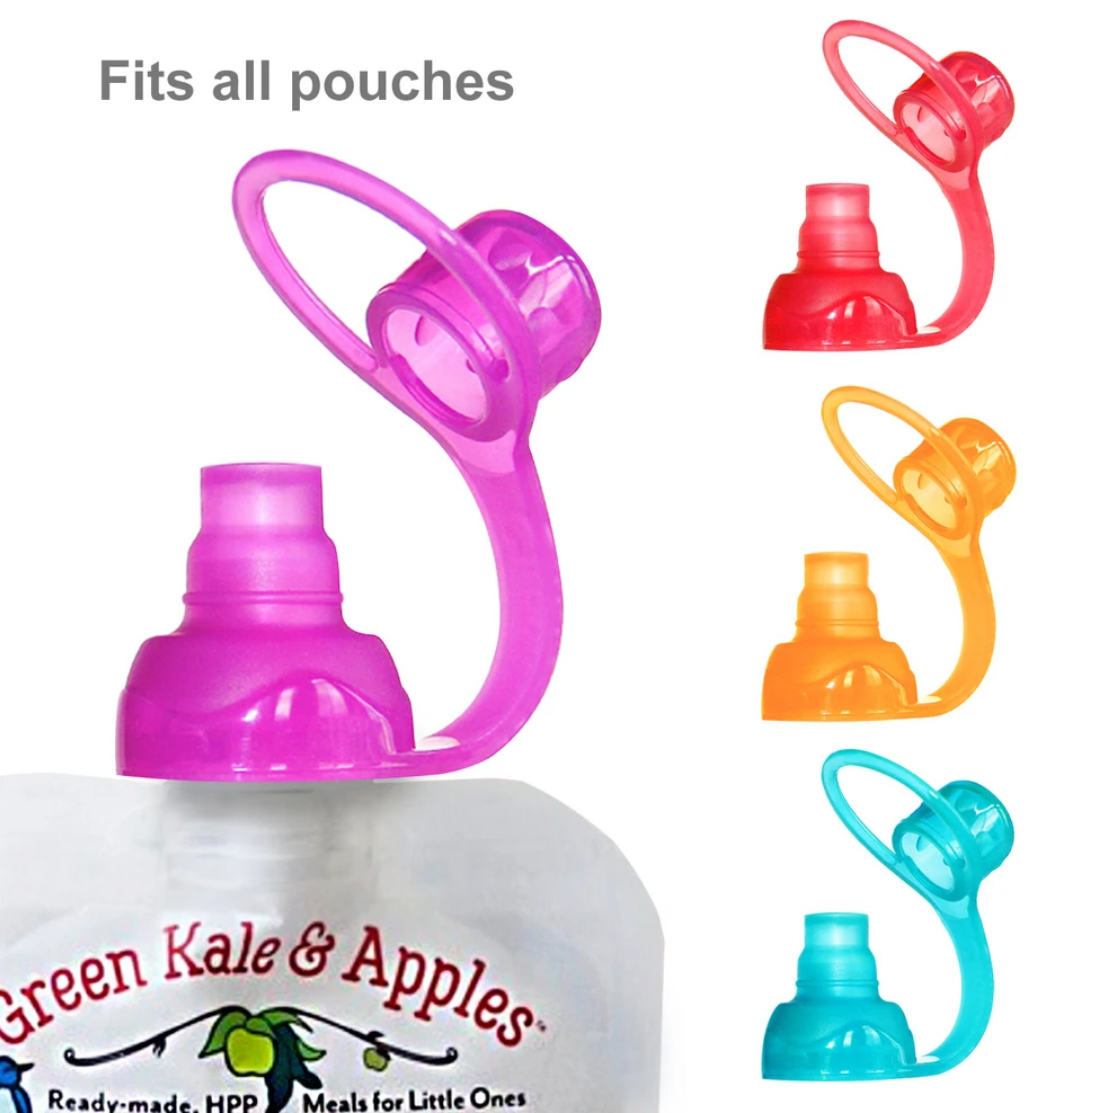 ChooMee - SoftSip Food Pouch Silicone Top 4 Pack - Various Colours